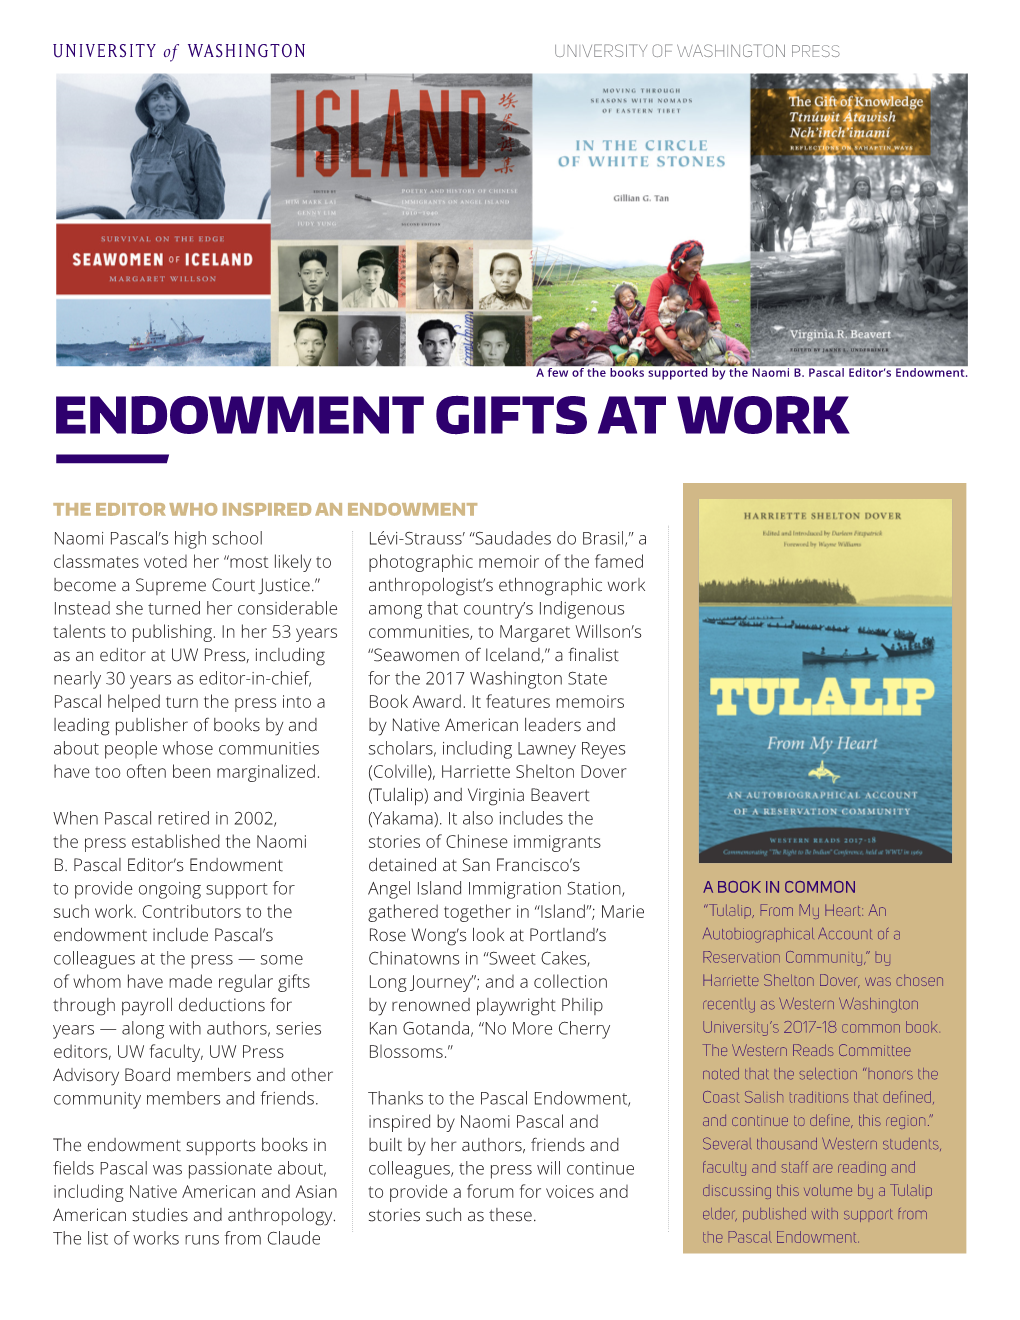 Endowment Gifts at Work